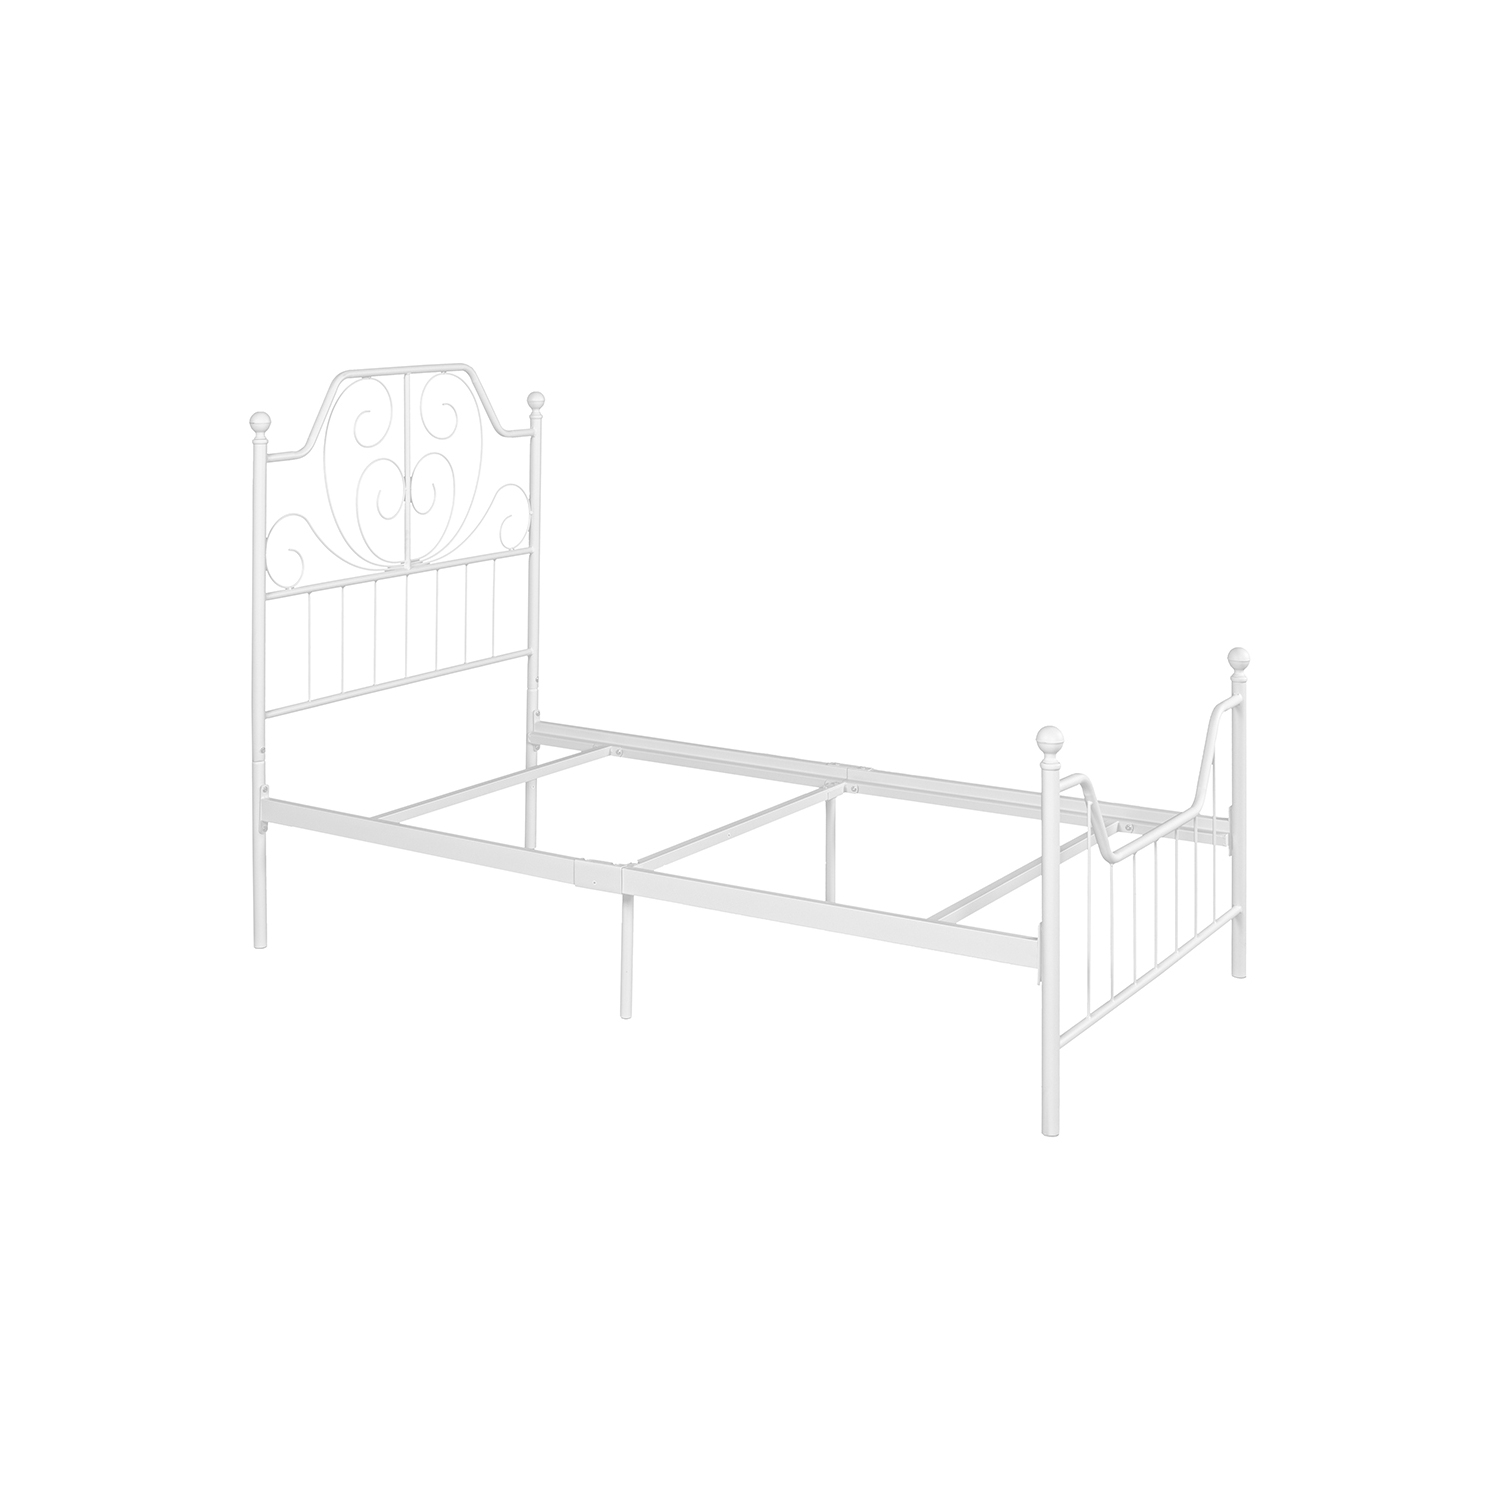 White Mattress Foundation Bed Frame, Metal Platform Bed Frame With Headboard And Footboard